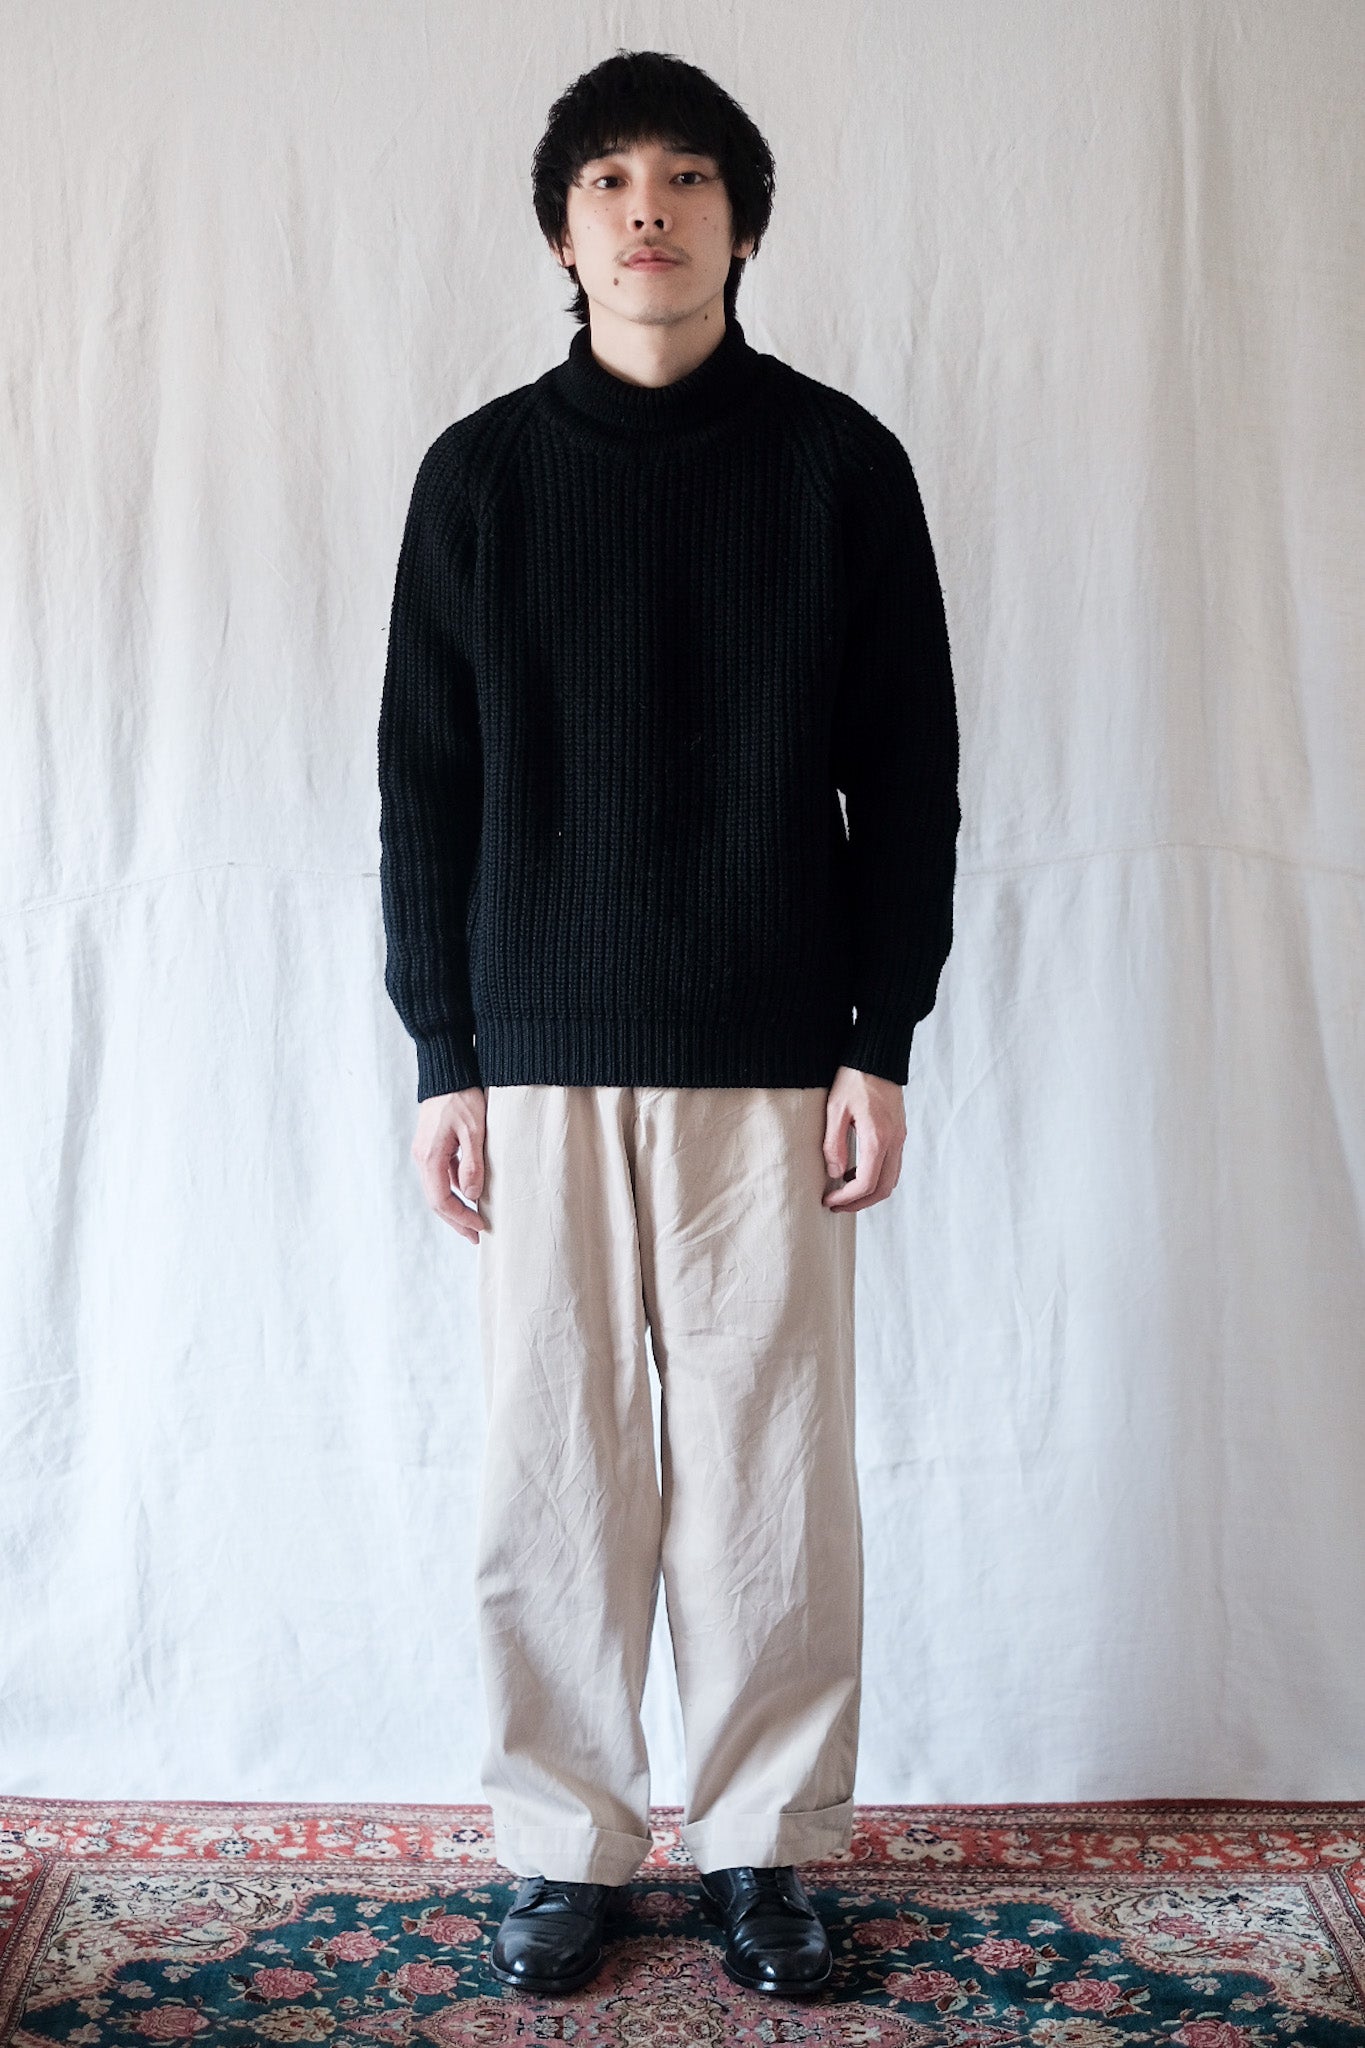 [~ 50's] French Vintage Chino Work Pants "Adolphe Lafont"